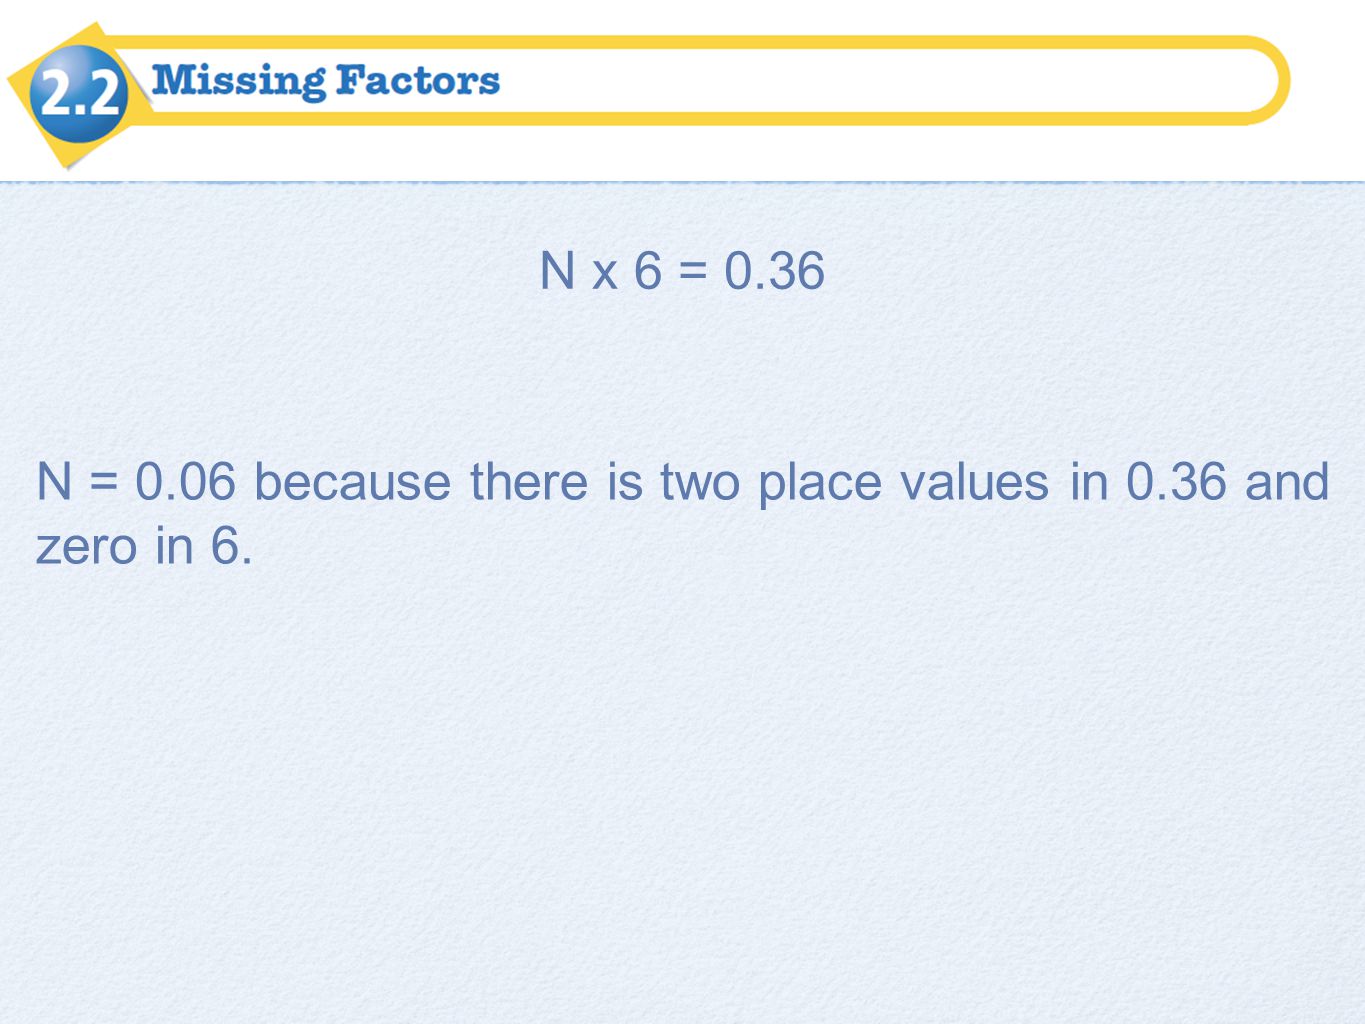 N x 6 = 0.36 N = 0.06 because there is two place values in 0.36 and zero in 6.